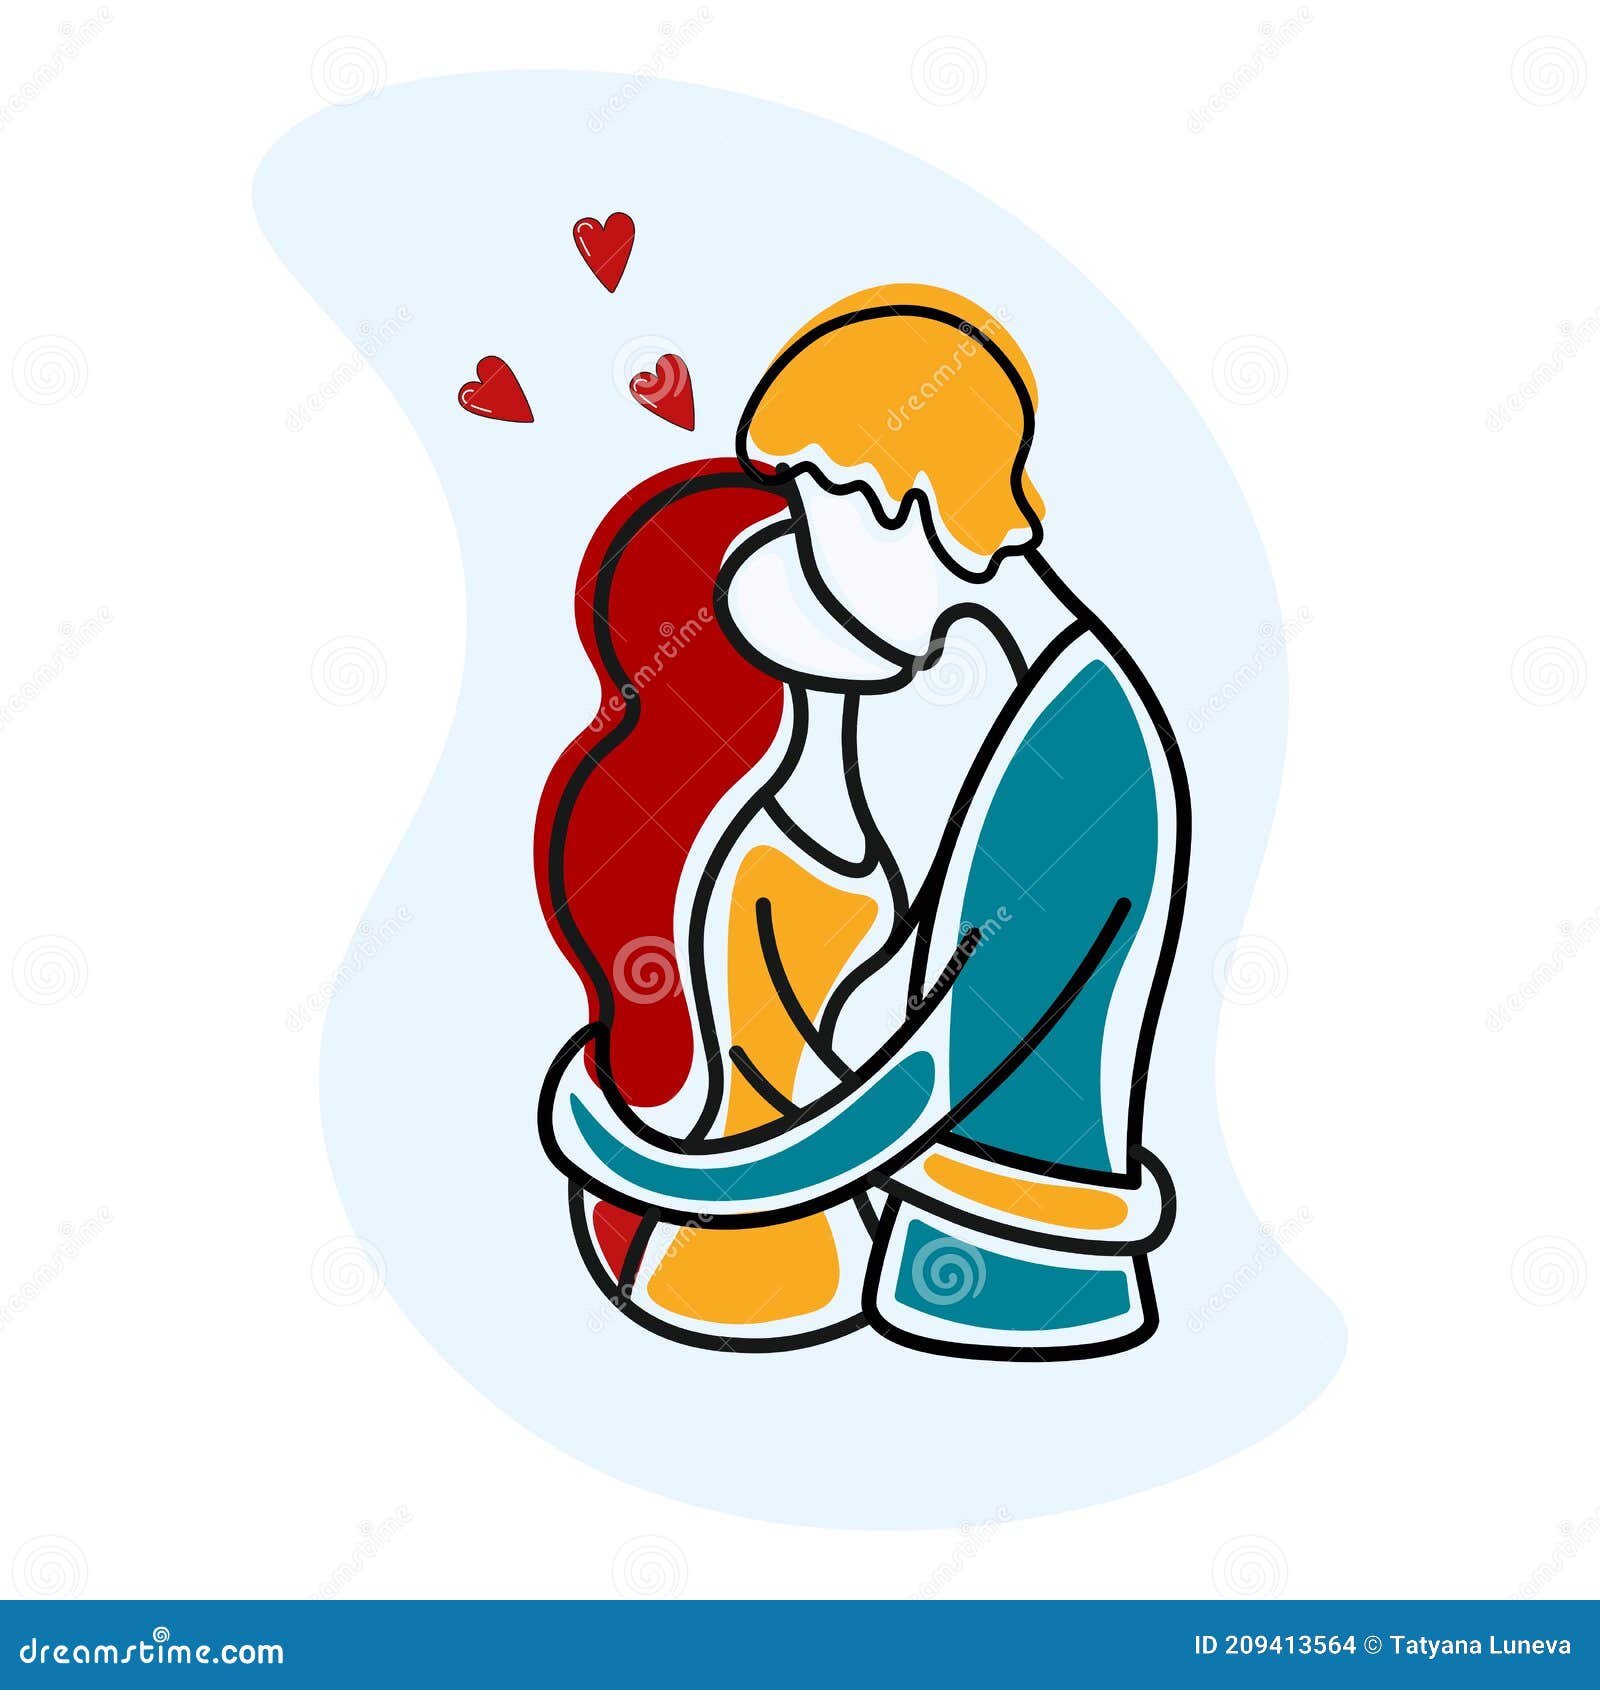 Premium Vector  Cute couple hand drawn doodle style. girl kiss